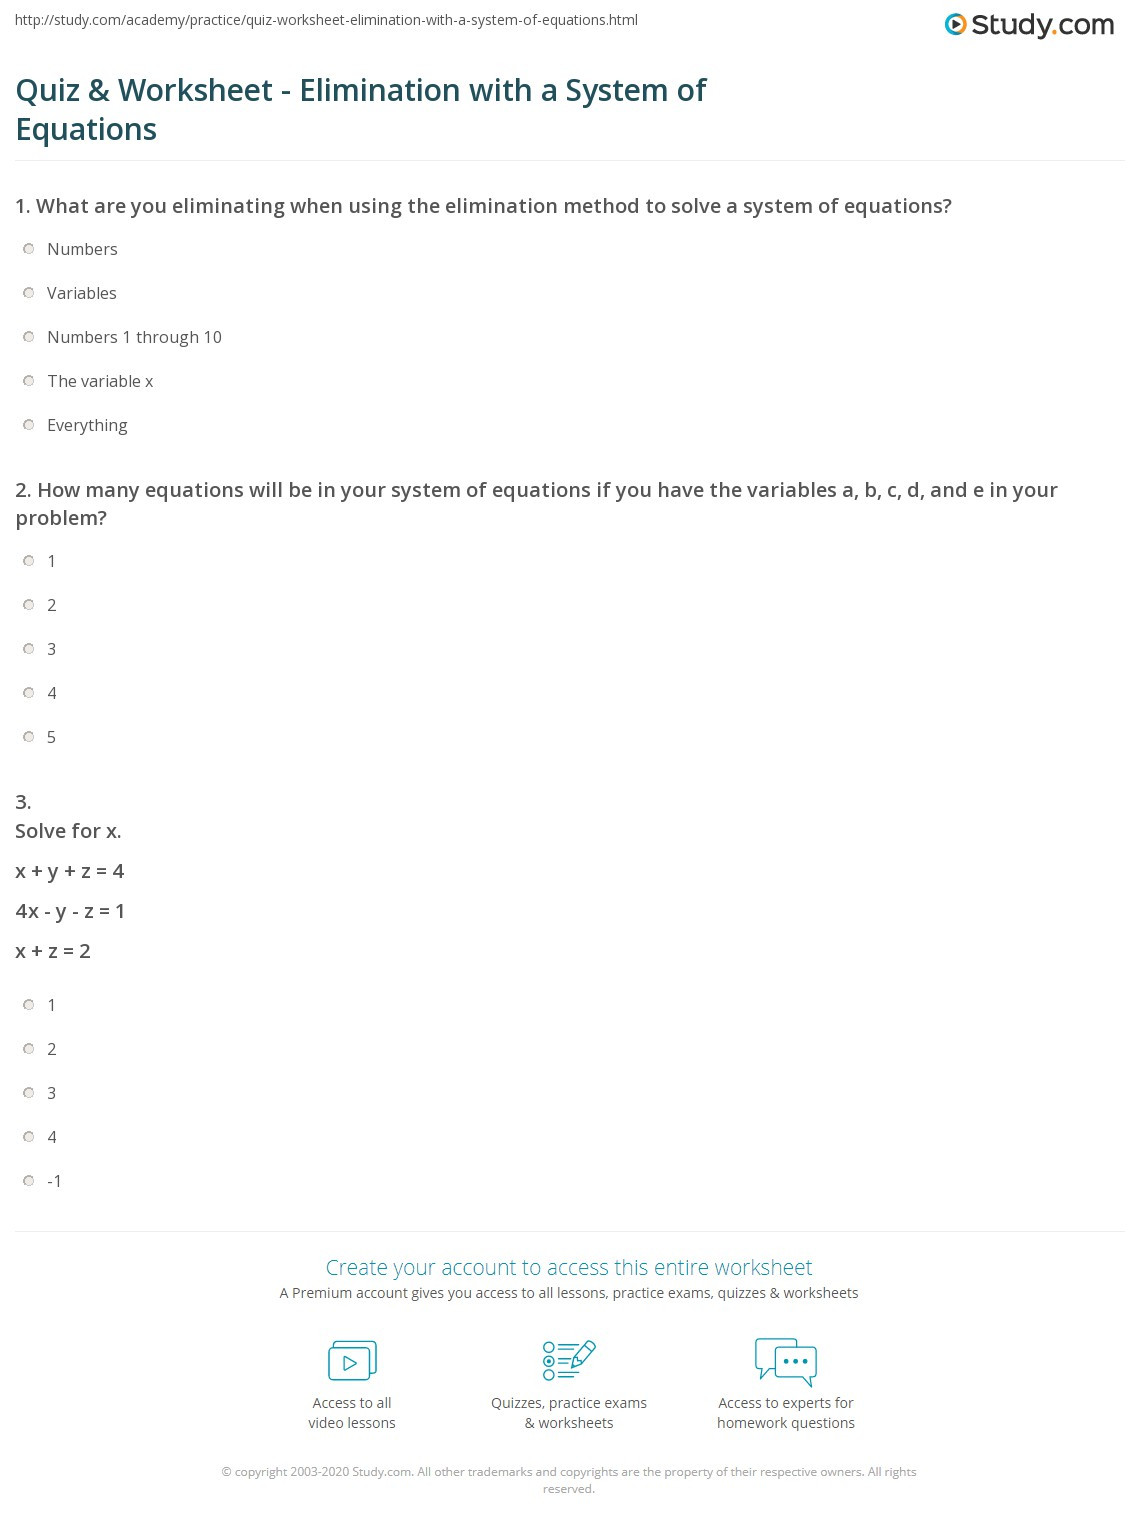 Systems Of Equations Elimination Worksheet Quiz &amp; Worksheet Elimination with A System Of Equations